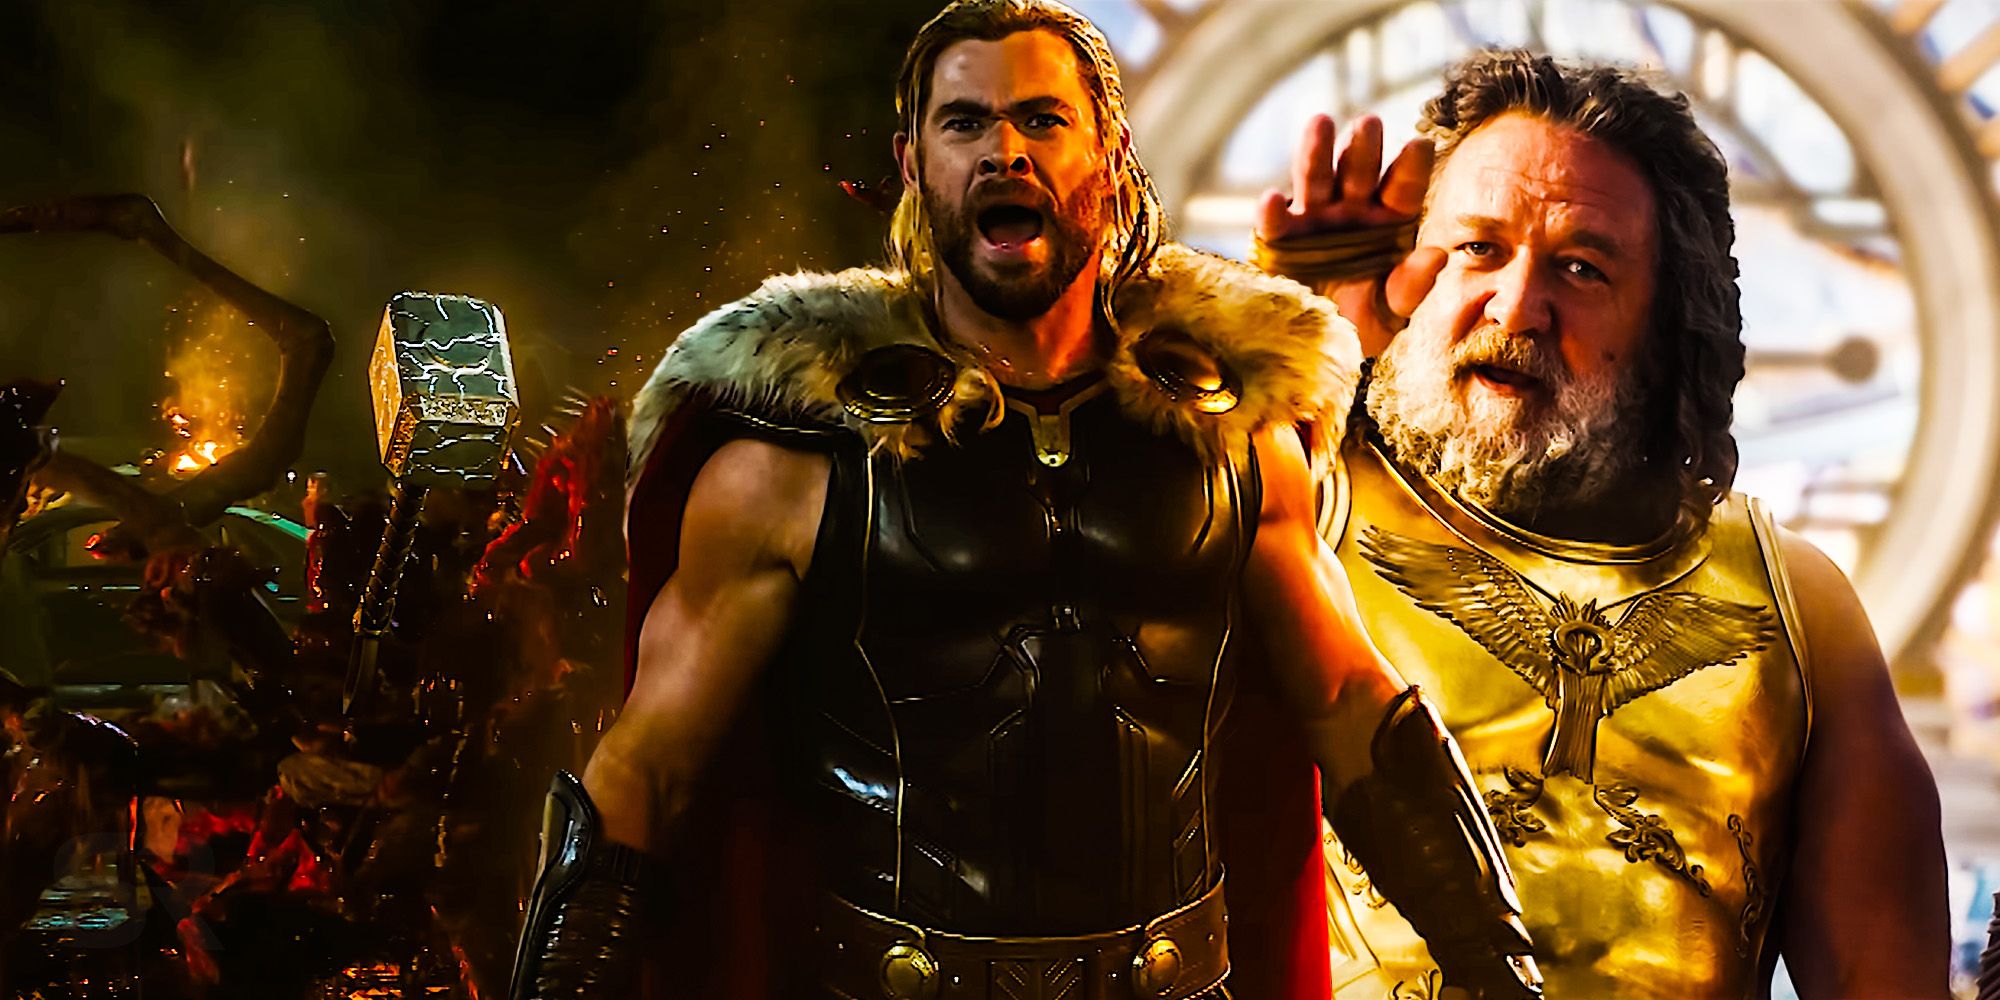 Thor: Love And Thunder: How Powerful Zeus Is Compared To Odin